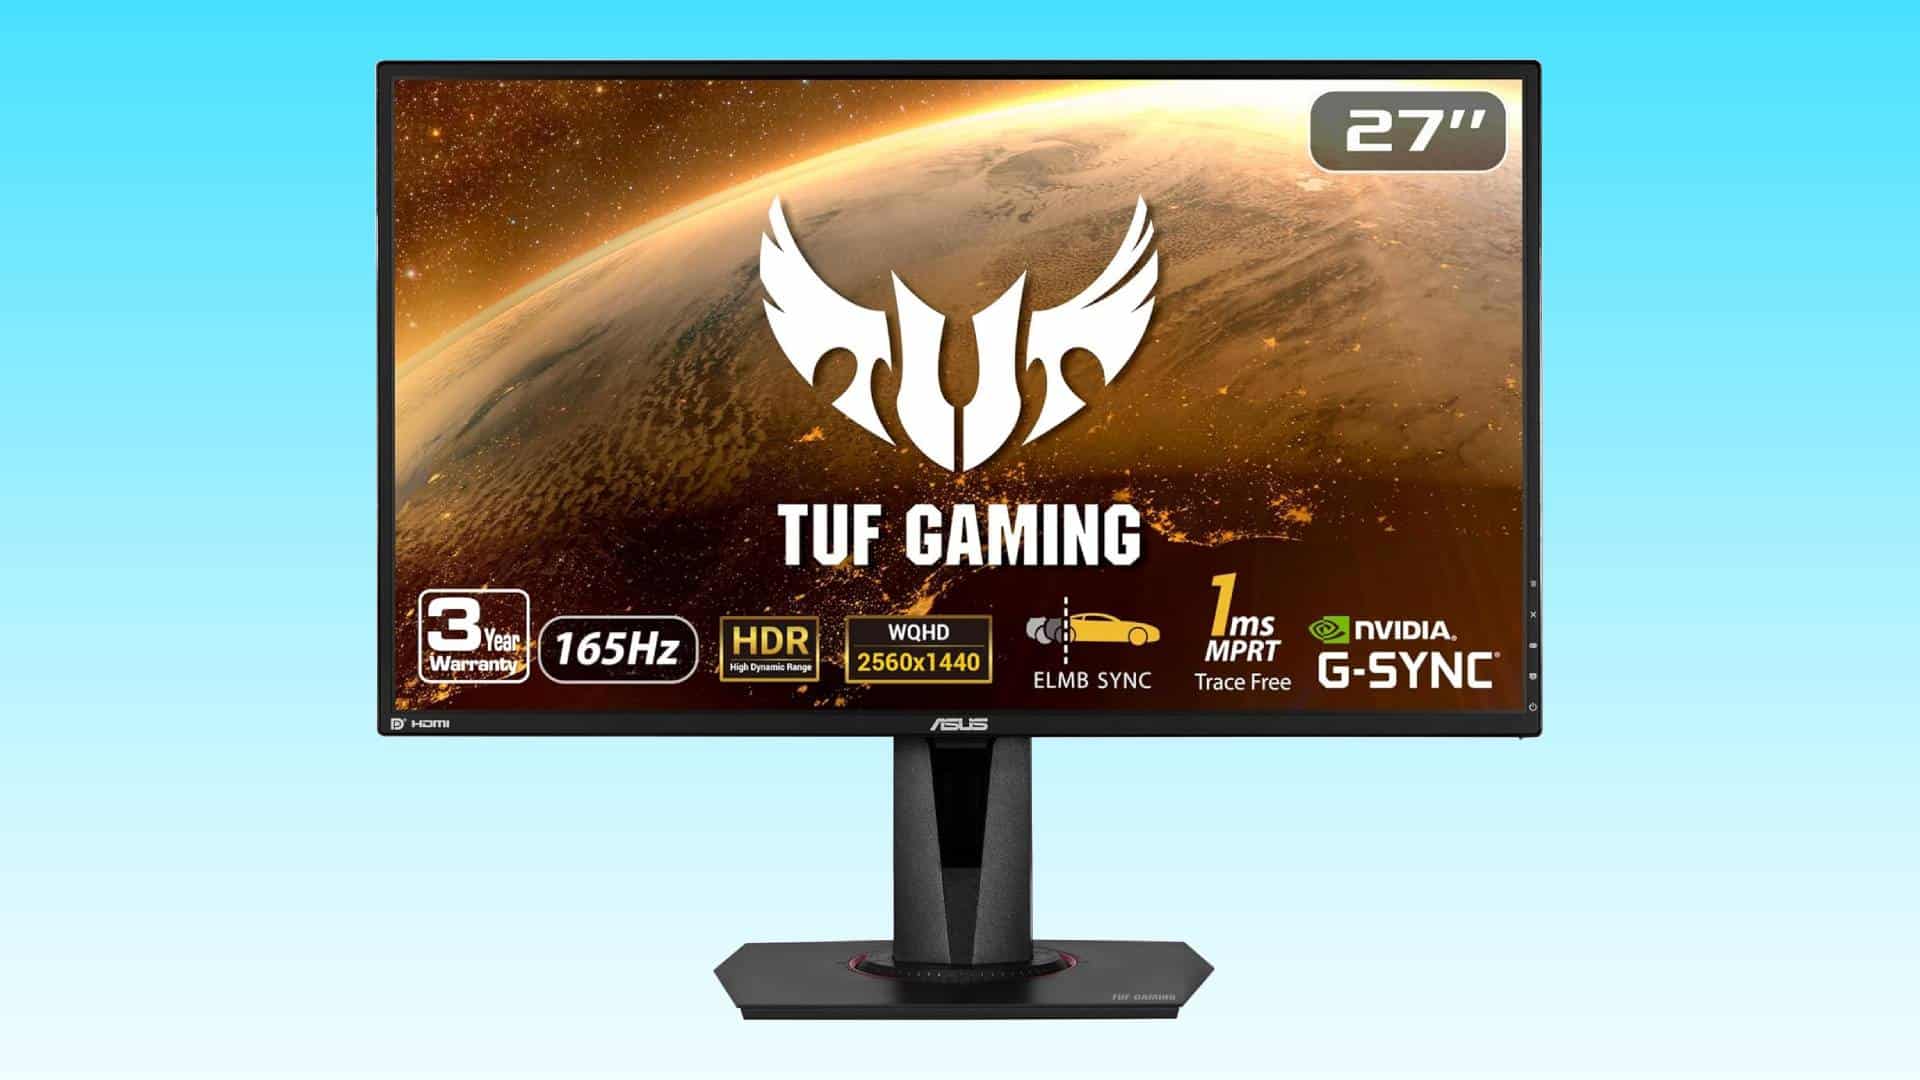 A 27-inch ASUS TUF gaming monitor displaying a space-themed image, featuring a 165hz refresh rate, HDR, and Nvidia G-SYNC technology.